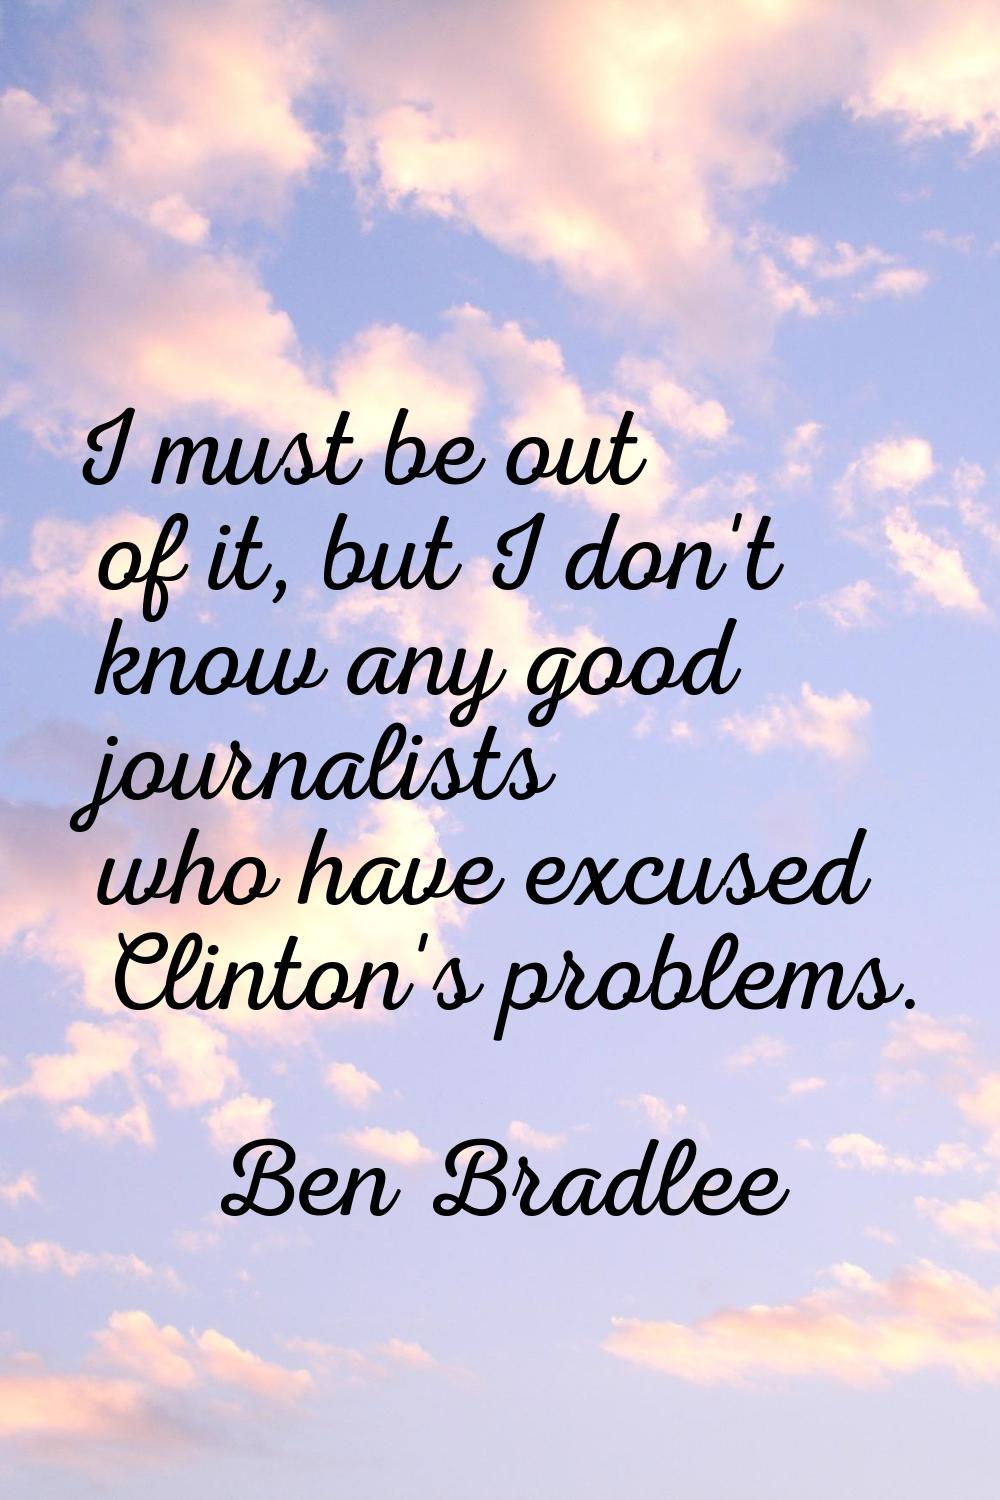 I must be out of it, but I don't know any good journalists who have excused Clinton's problems.